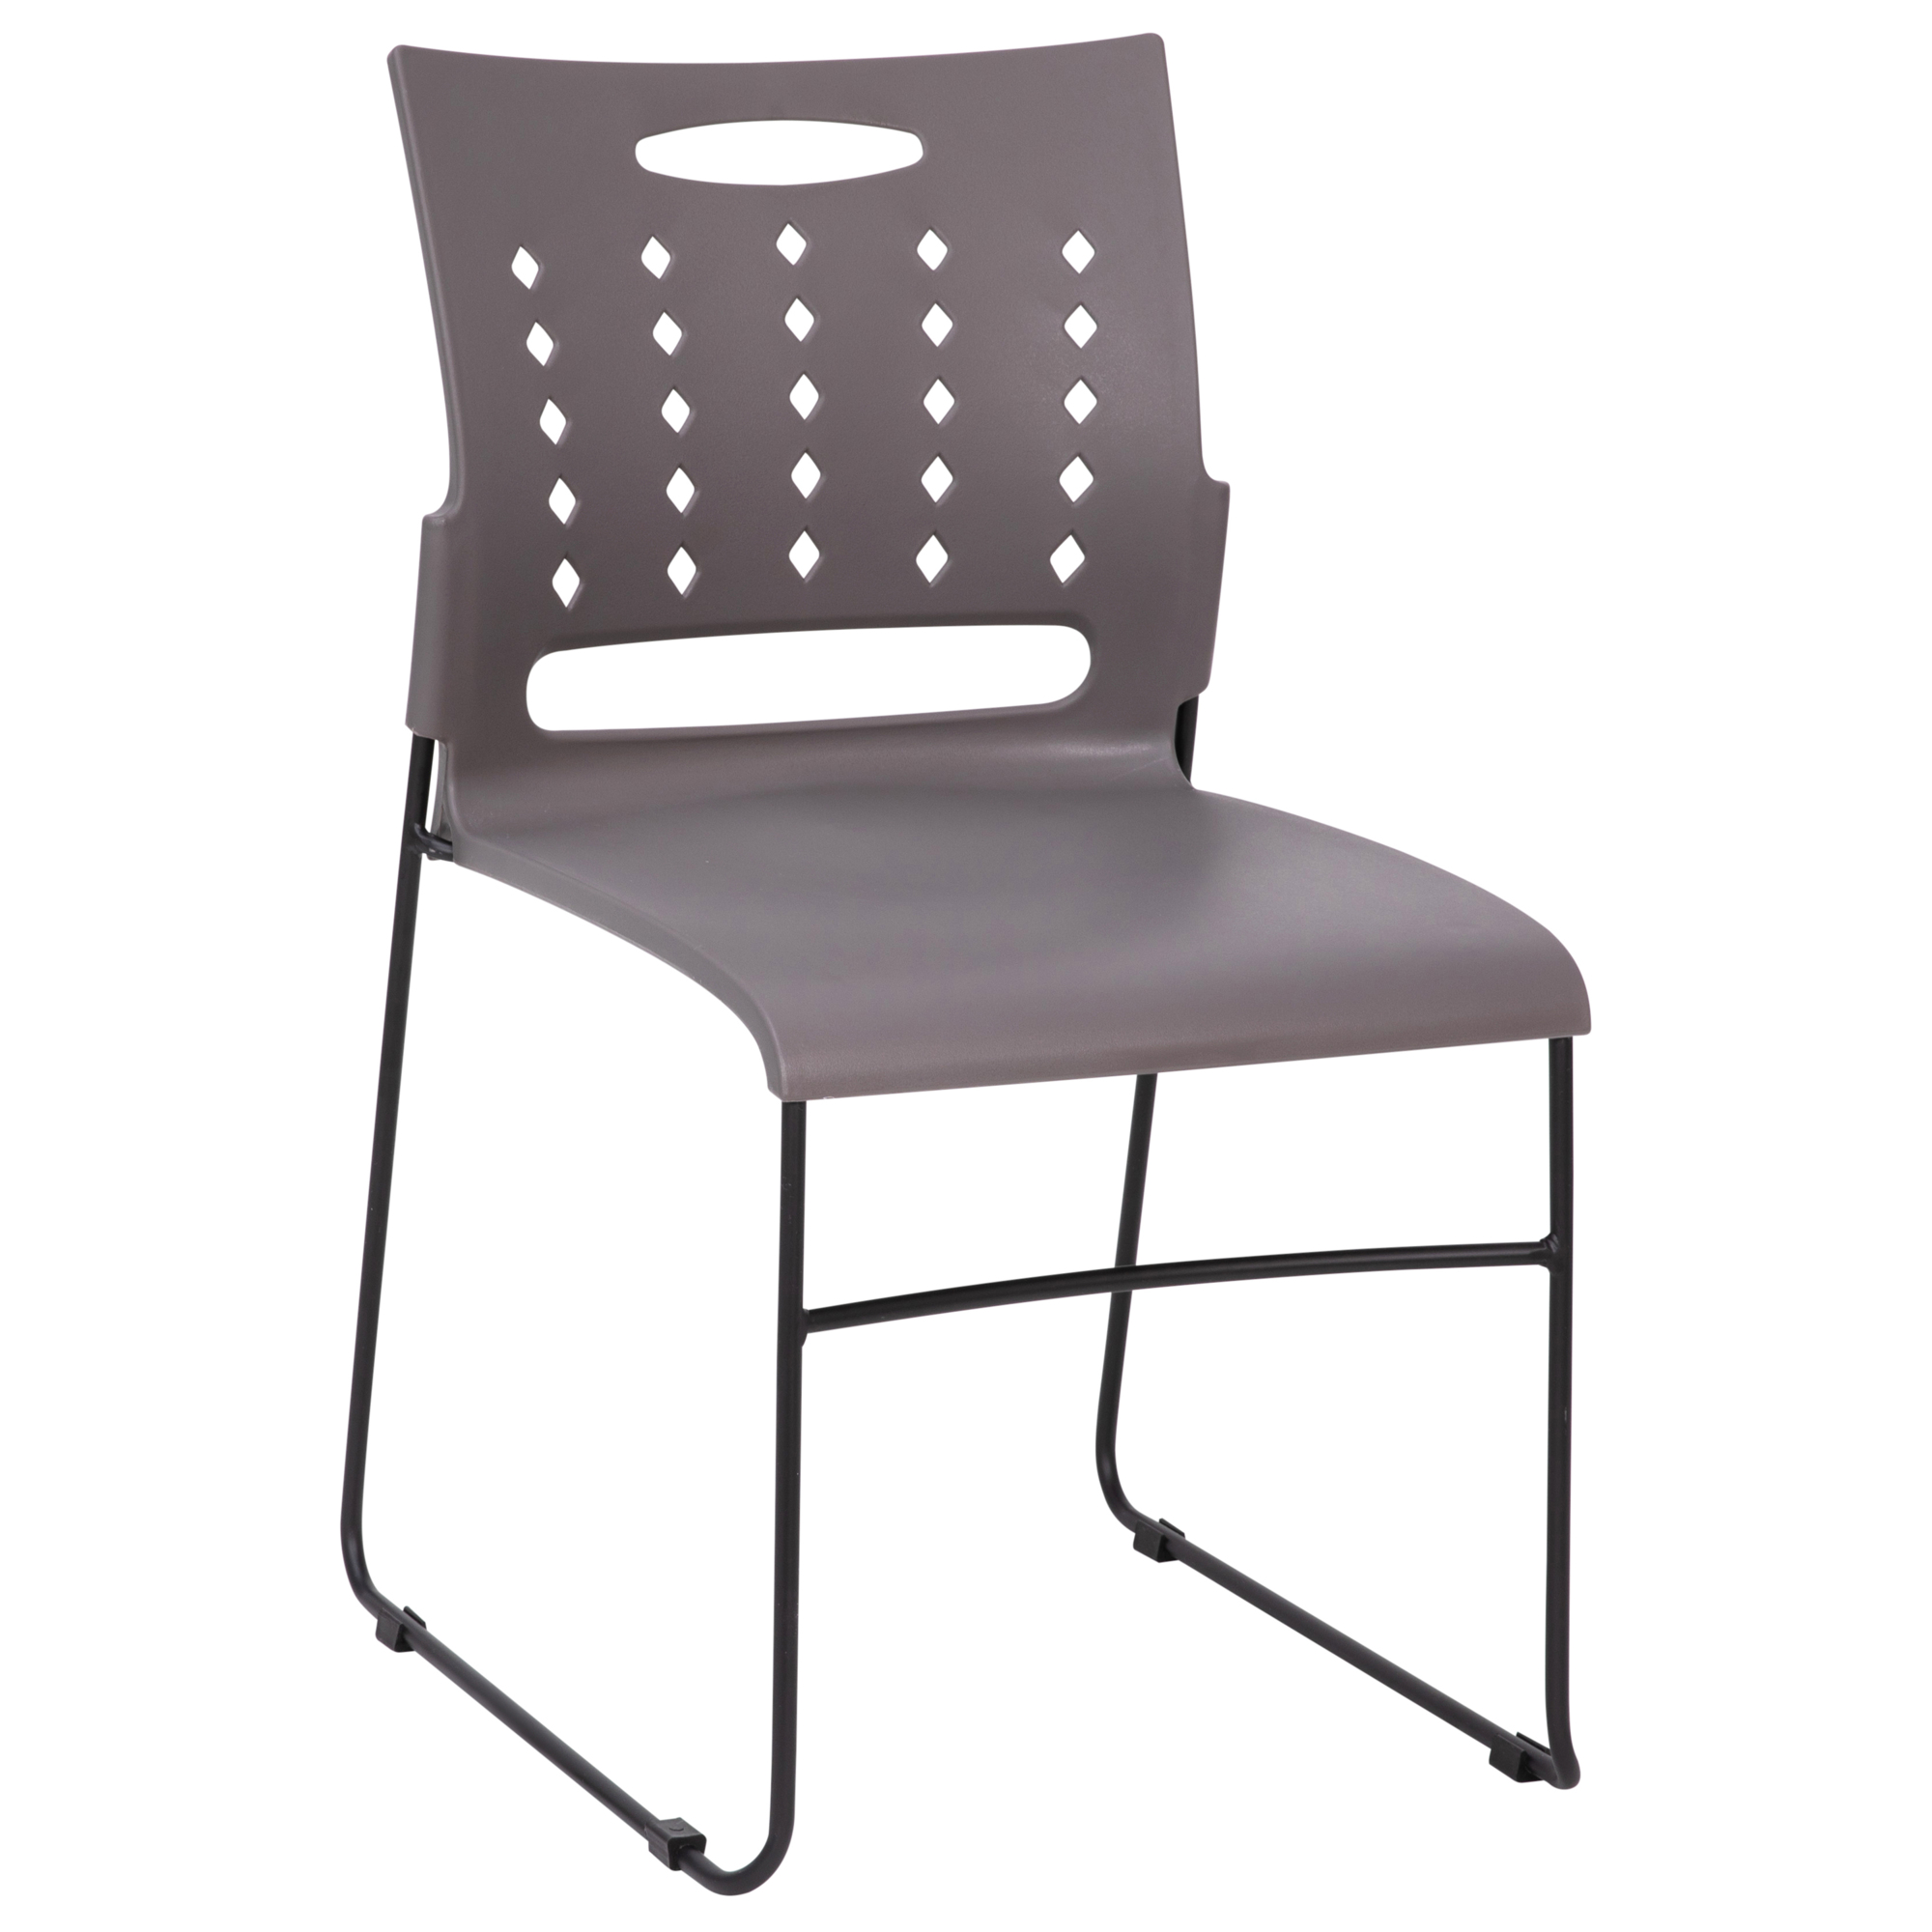 Flash Furniture, 881 lb. Capacity Gray Sled Base Stack Chair, Primary Color Gray, Included (qty.) 1, Model RUT2GYBK